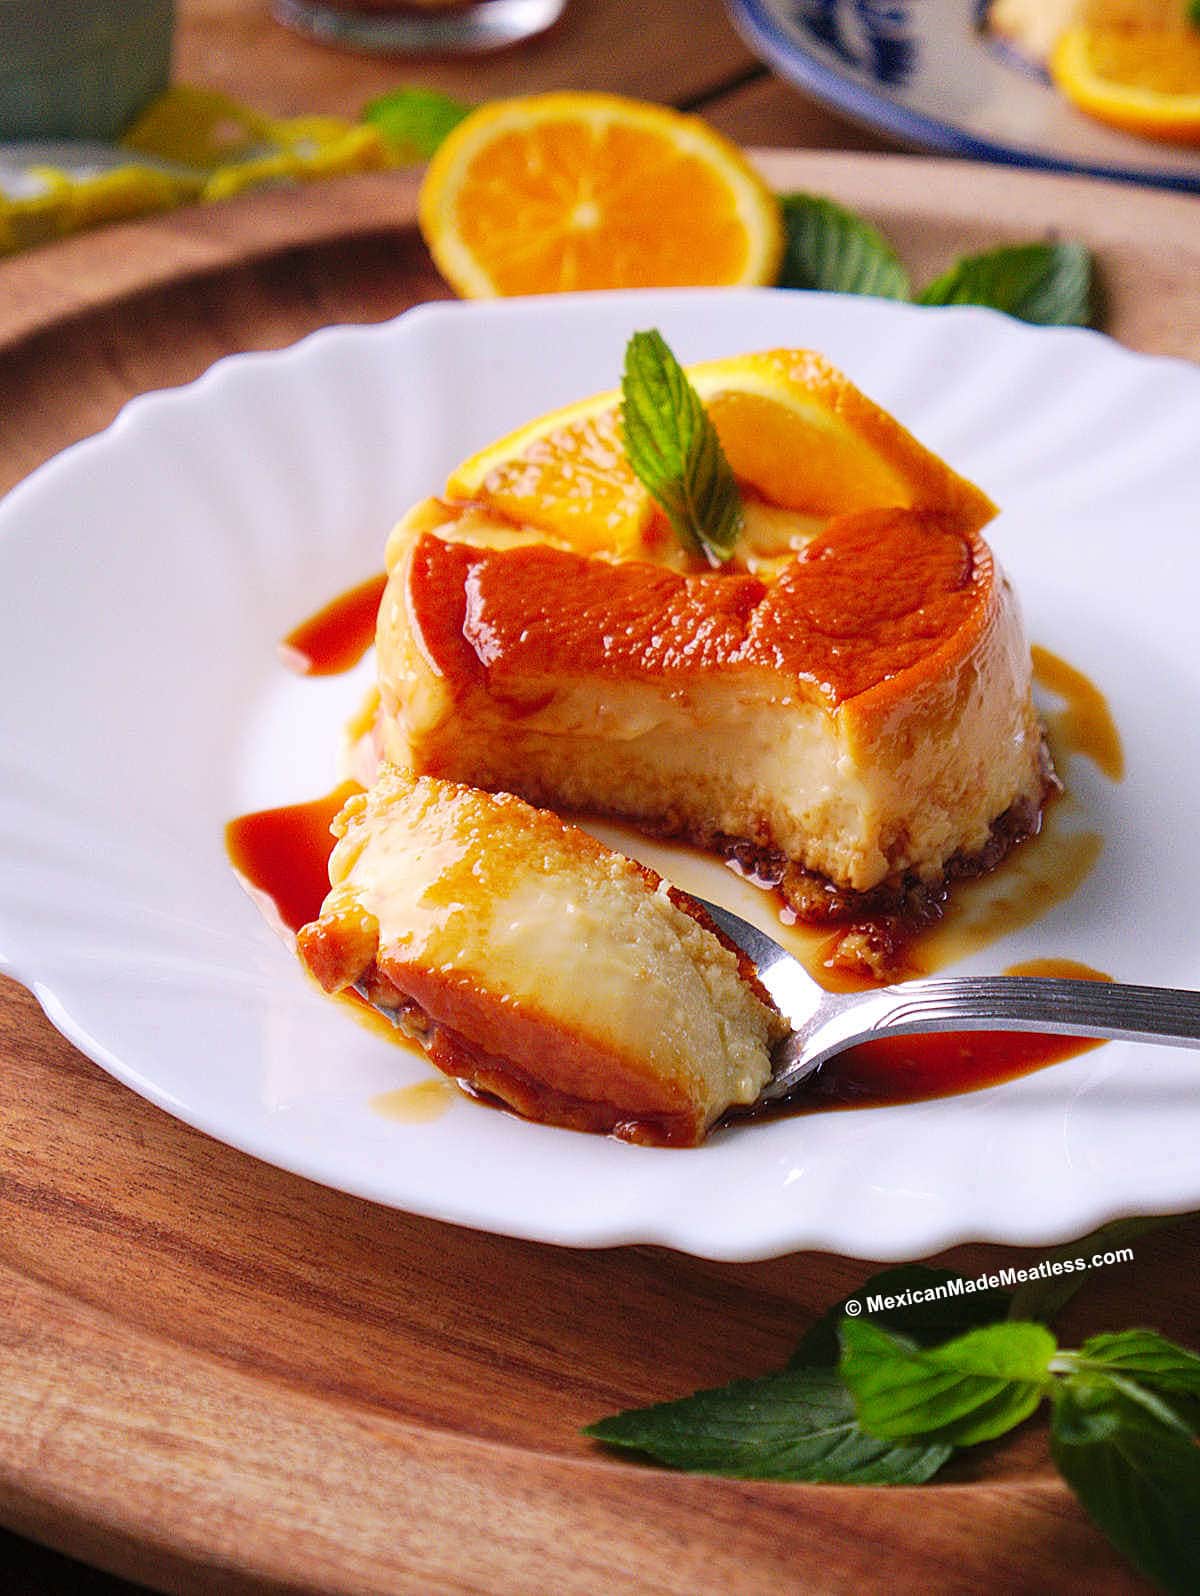 Individual flan made with La Lechera and orange juice served on a small white plate with caramel sauce.